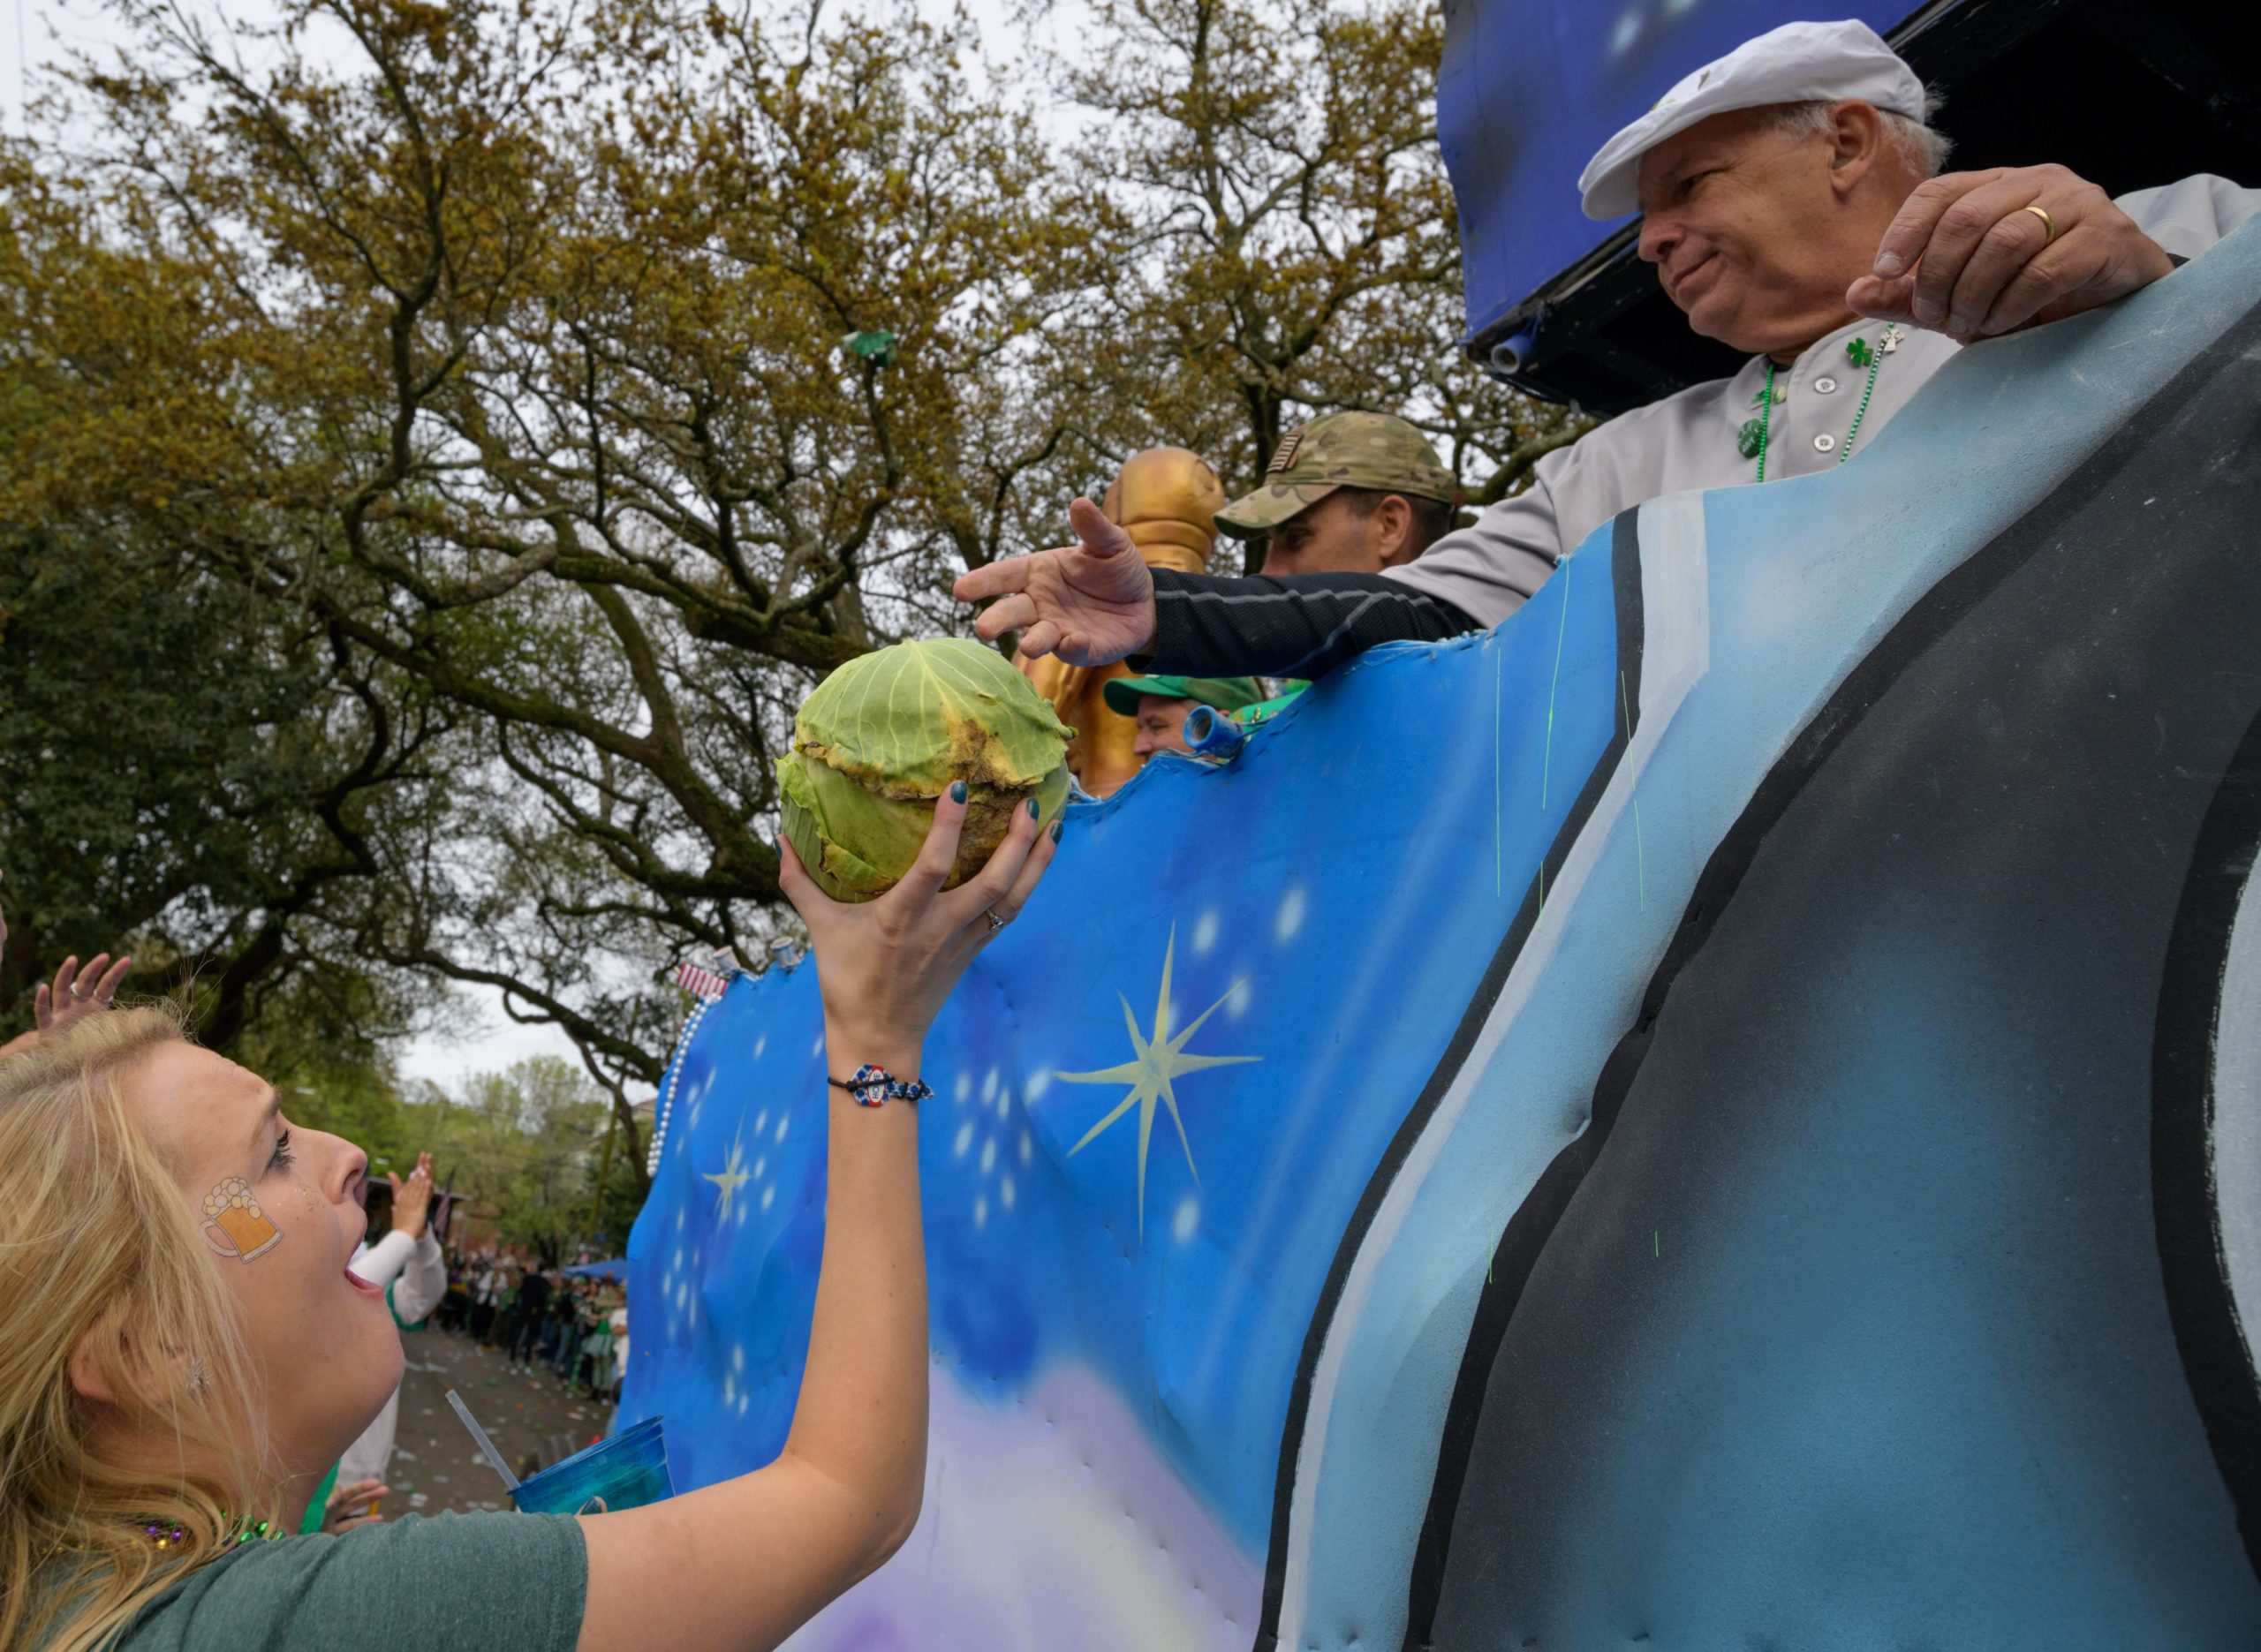 A float rider throws cabbage during the Irish Channel St. Patrick's Parade in New Orleans, La. Saturday, March 16, 2019. Cabbage is an ingredient of many traditional Irish dishes for St. Patrick's Day including corned beef and cabbage and it's the most coveted throw during the parade. Photo by Matthew Hinton